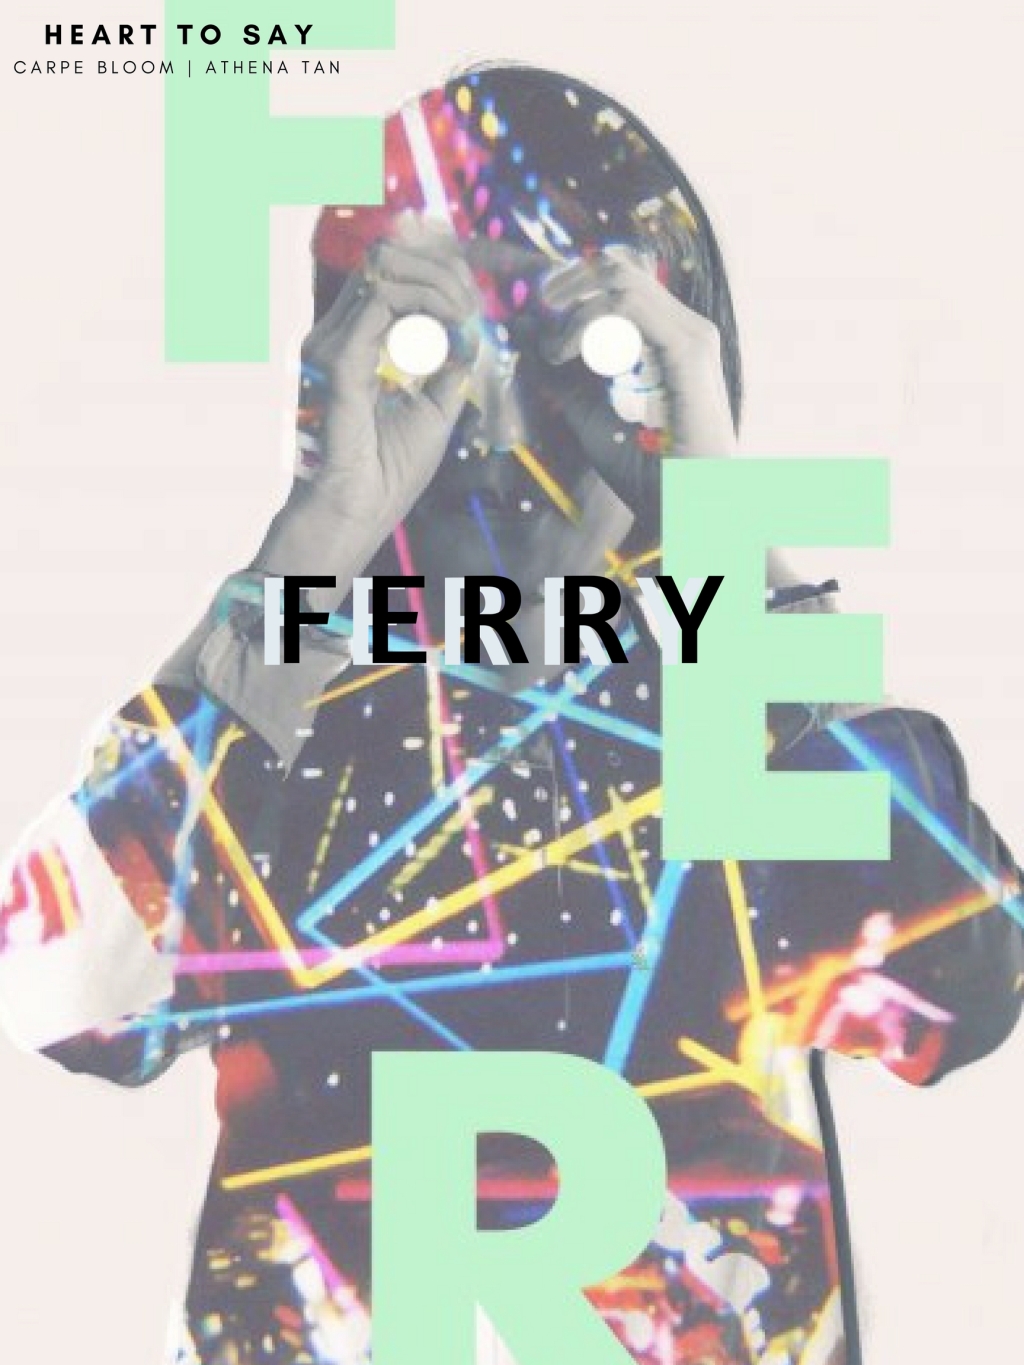 HEART TO SAY WITH FERRY